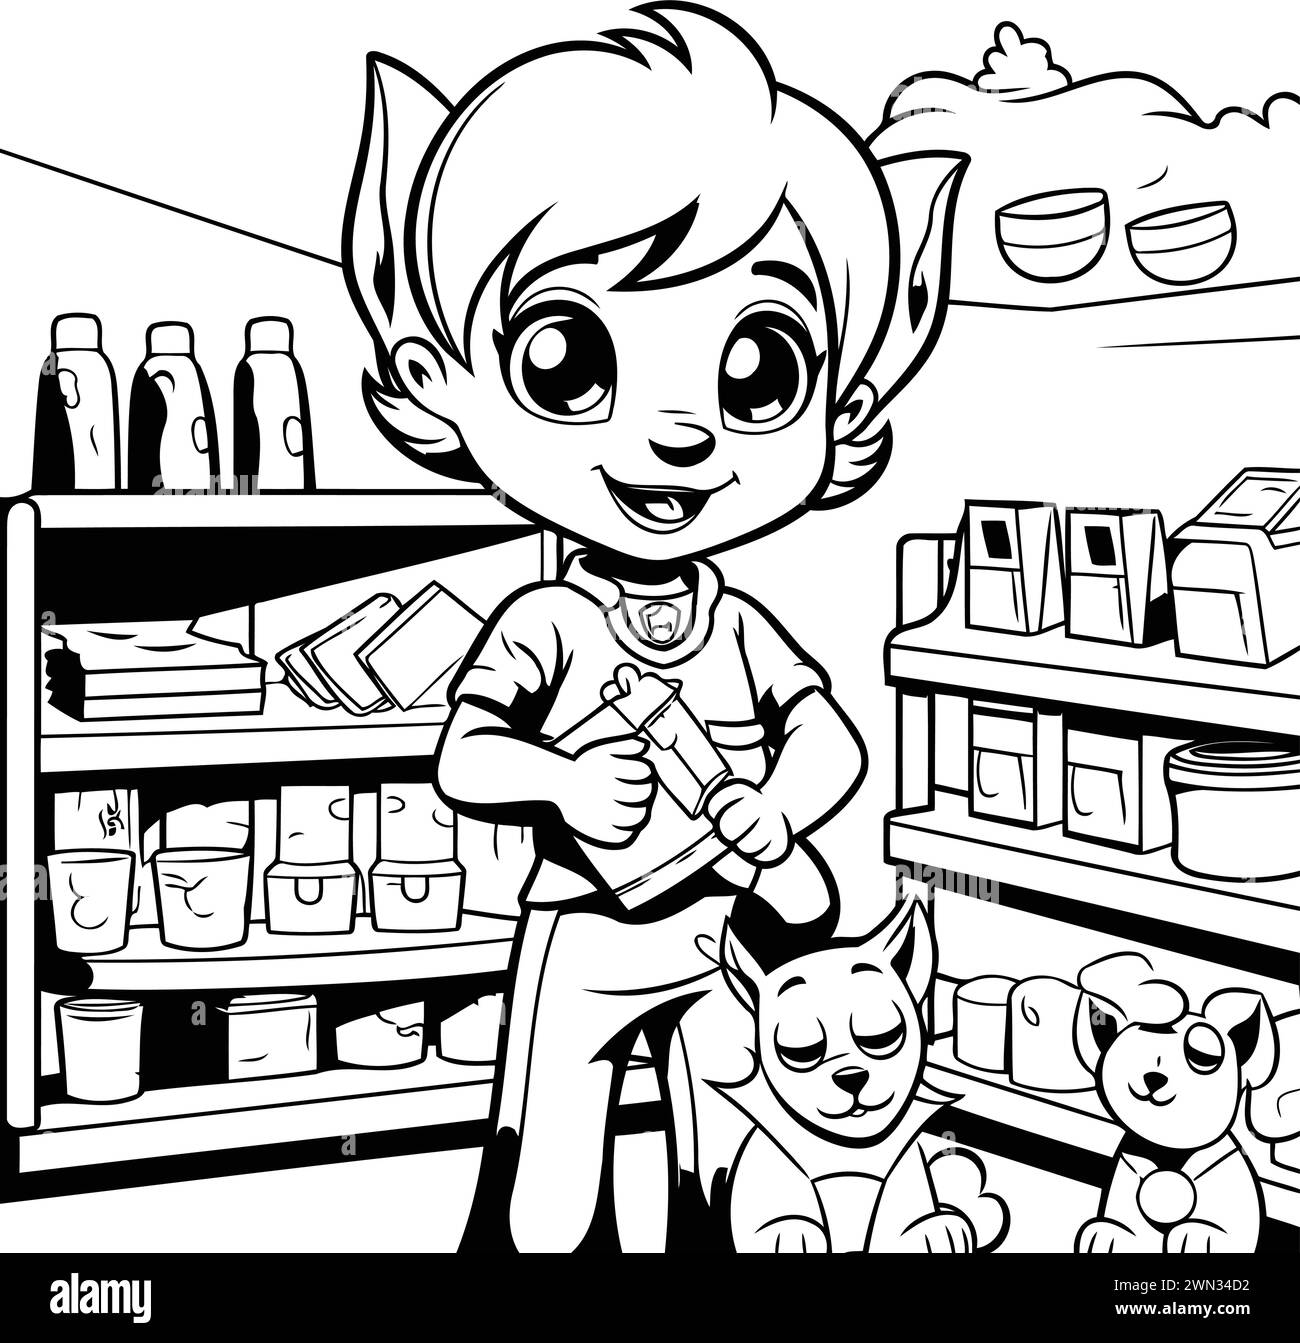 Black and white illustration of a boy with a dog in a pet shop. Stock Vector